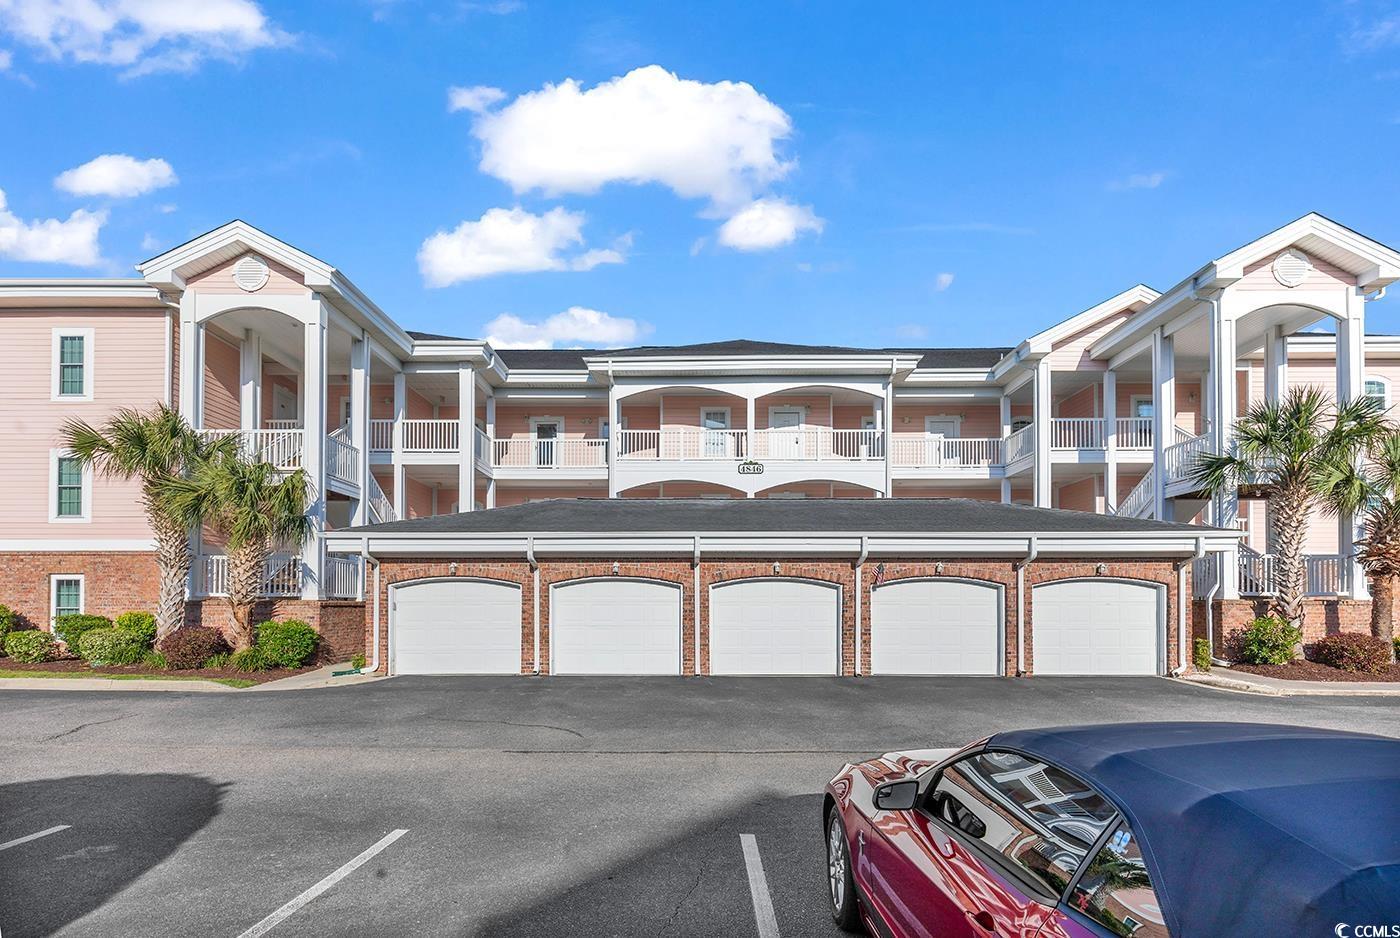 Photo one of 4846 Carnation Circle # 103 Myrtle Beach SC 29577 | MLS 2406878